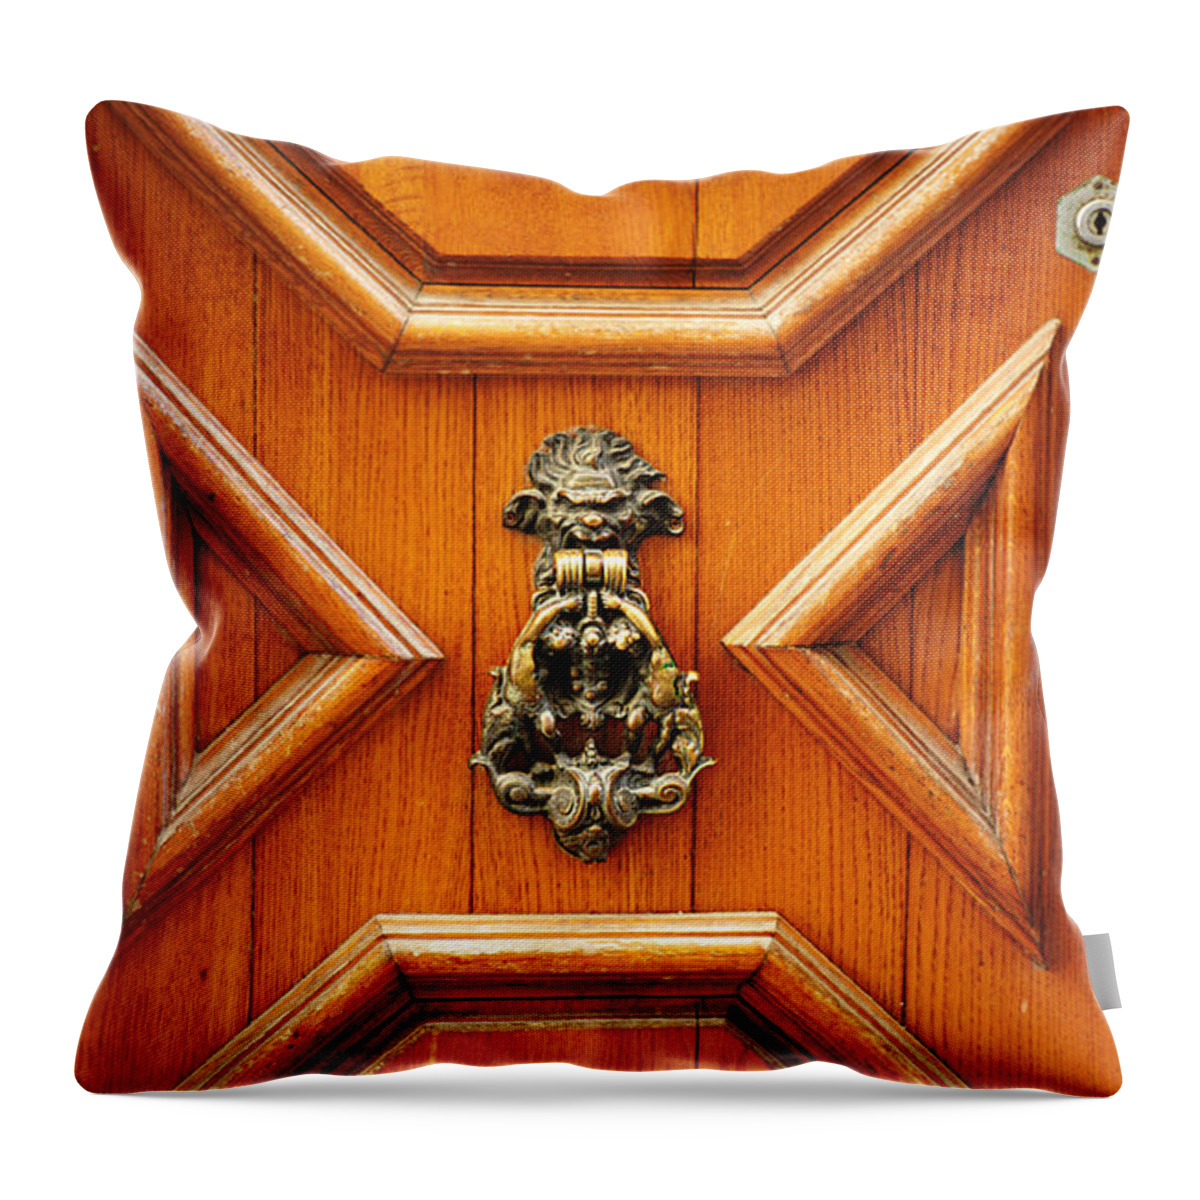 Door Throw Pillow featuring the photograph Venice Geometric Oak Wood Door And Brass Knocker by Suzanne Powers